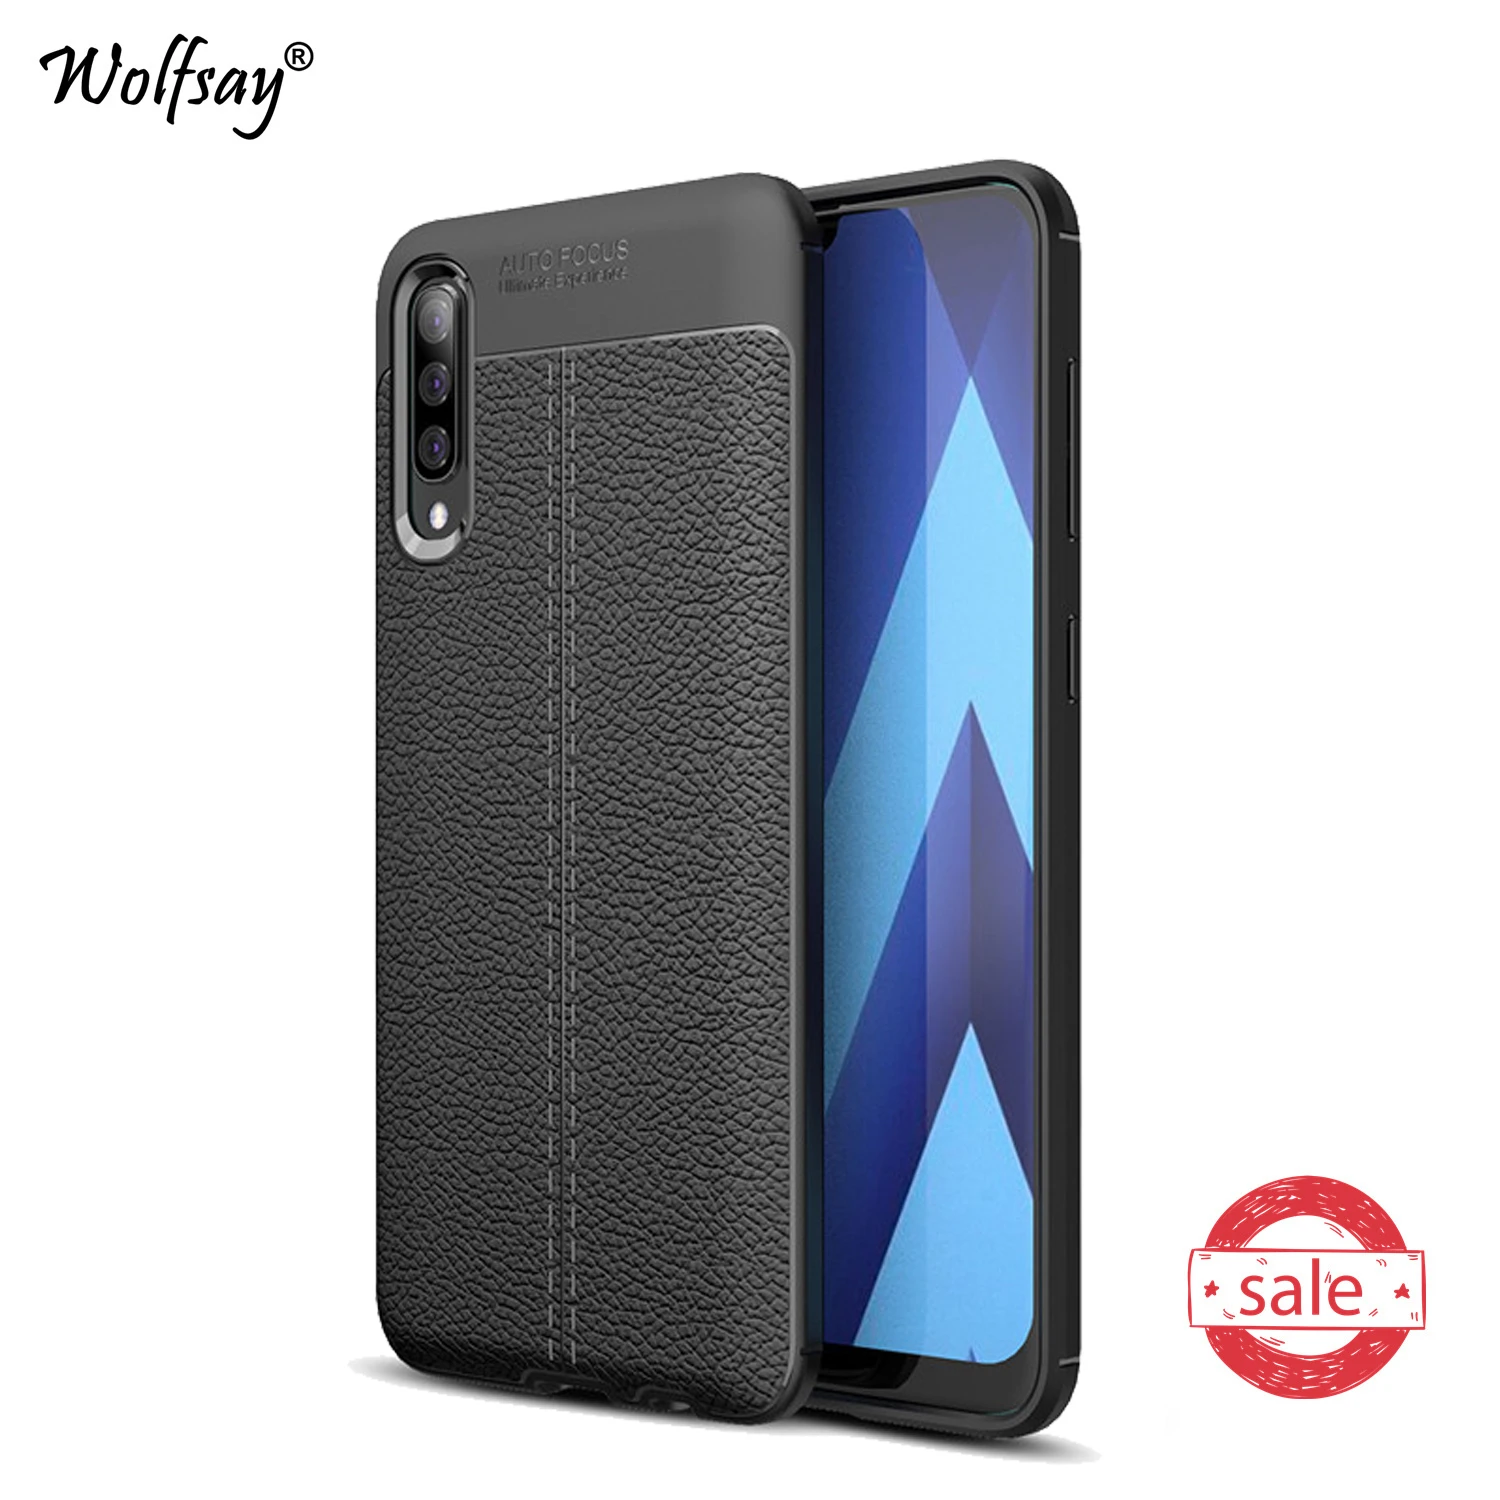 lip aansluiten sneeuwman For Samsung Galaxy A70 Case Luxury Rubber Soft Silicone Phone Case For Samsung  Galaxy A70 Back Cover For Samsung A70 A 70 Fundas|Phone Case & Covers| -  AliExpress